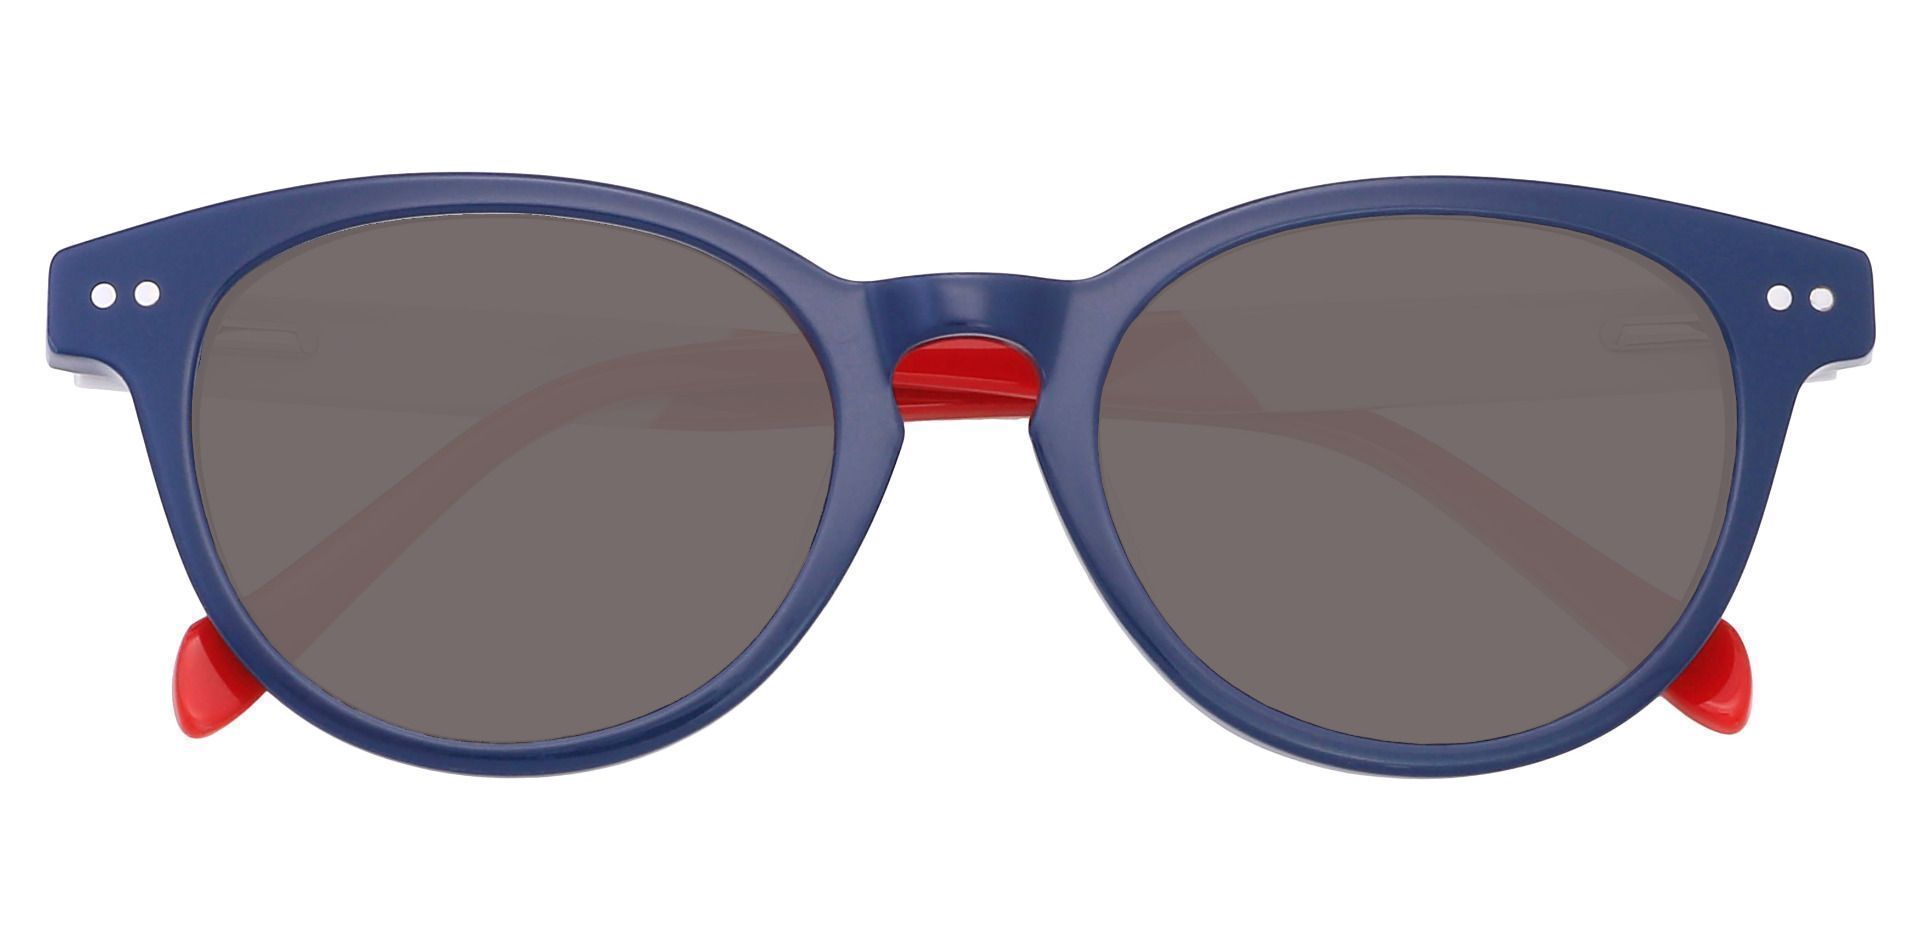 Revere Oval Non-Rx Sunglasses - Blue Frame With Gray Lenses